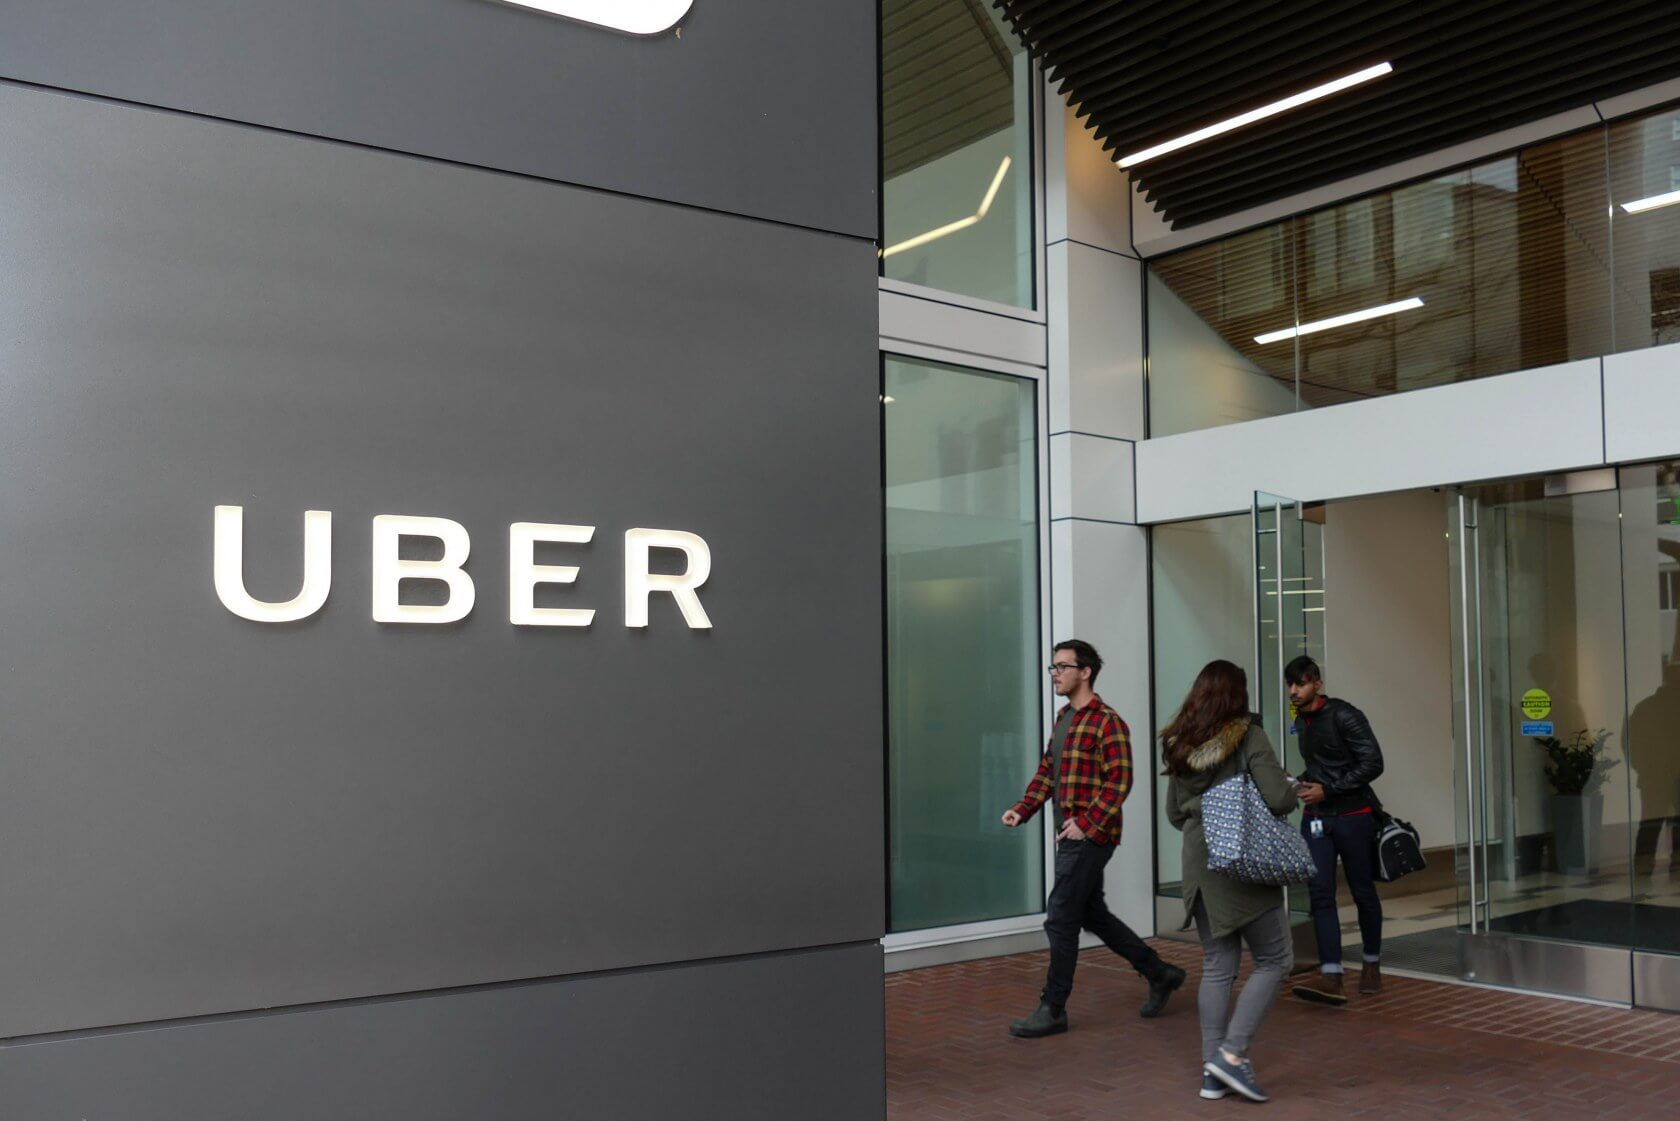 Uber finally hired a new CFO to try to stem losses before going public